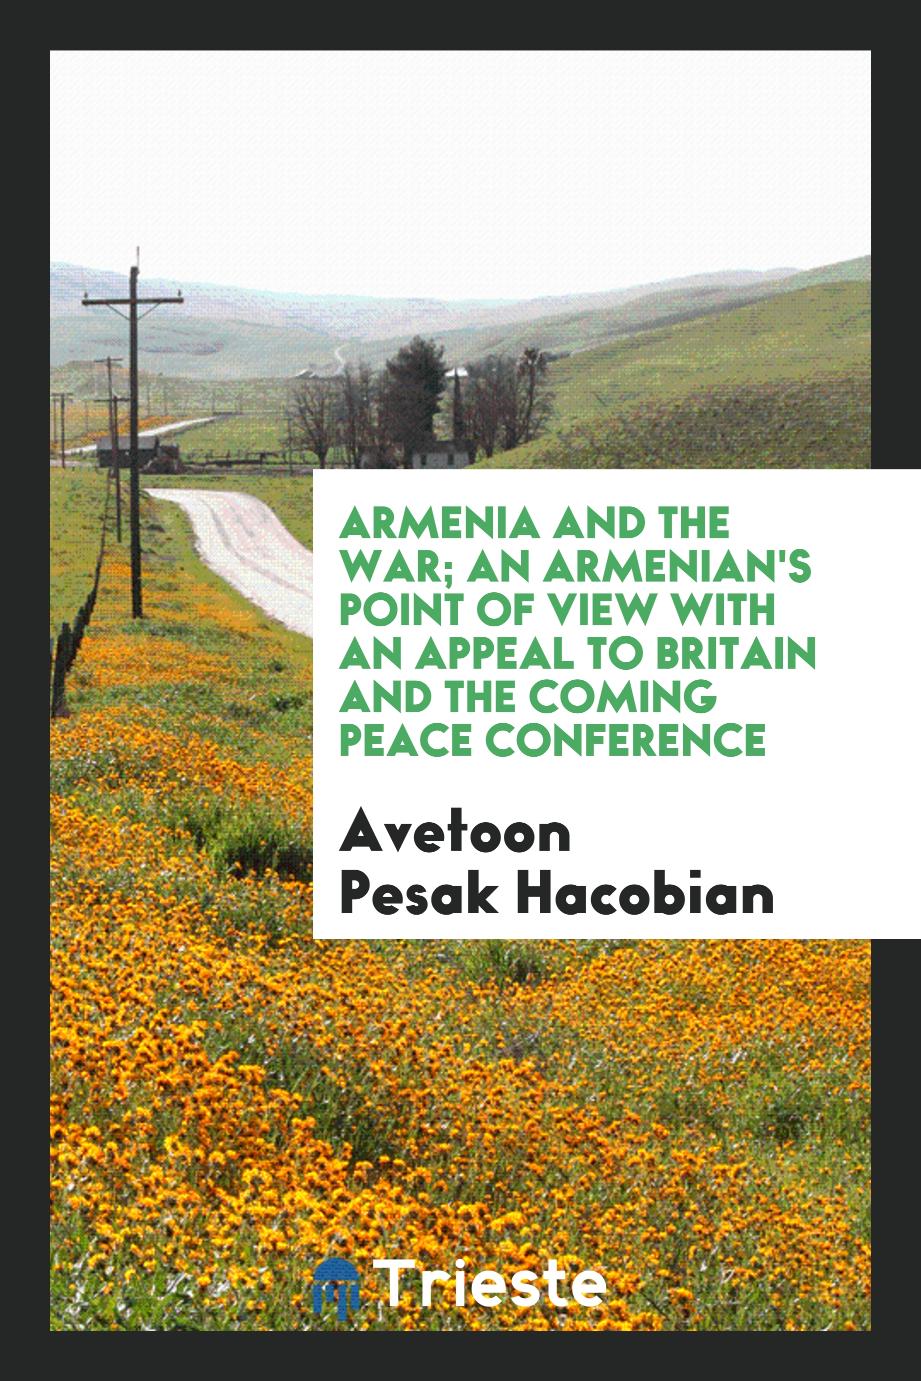 Armenia and the war; an Armenian's point of view with an appeal to Britain and the coming peace conference